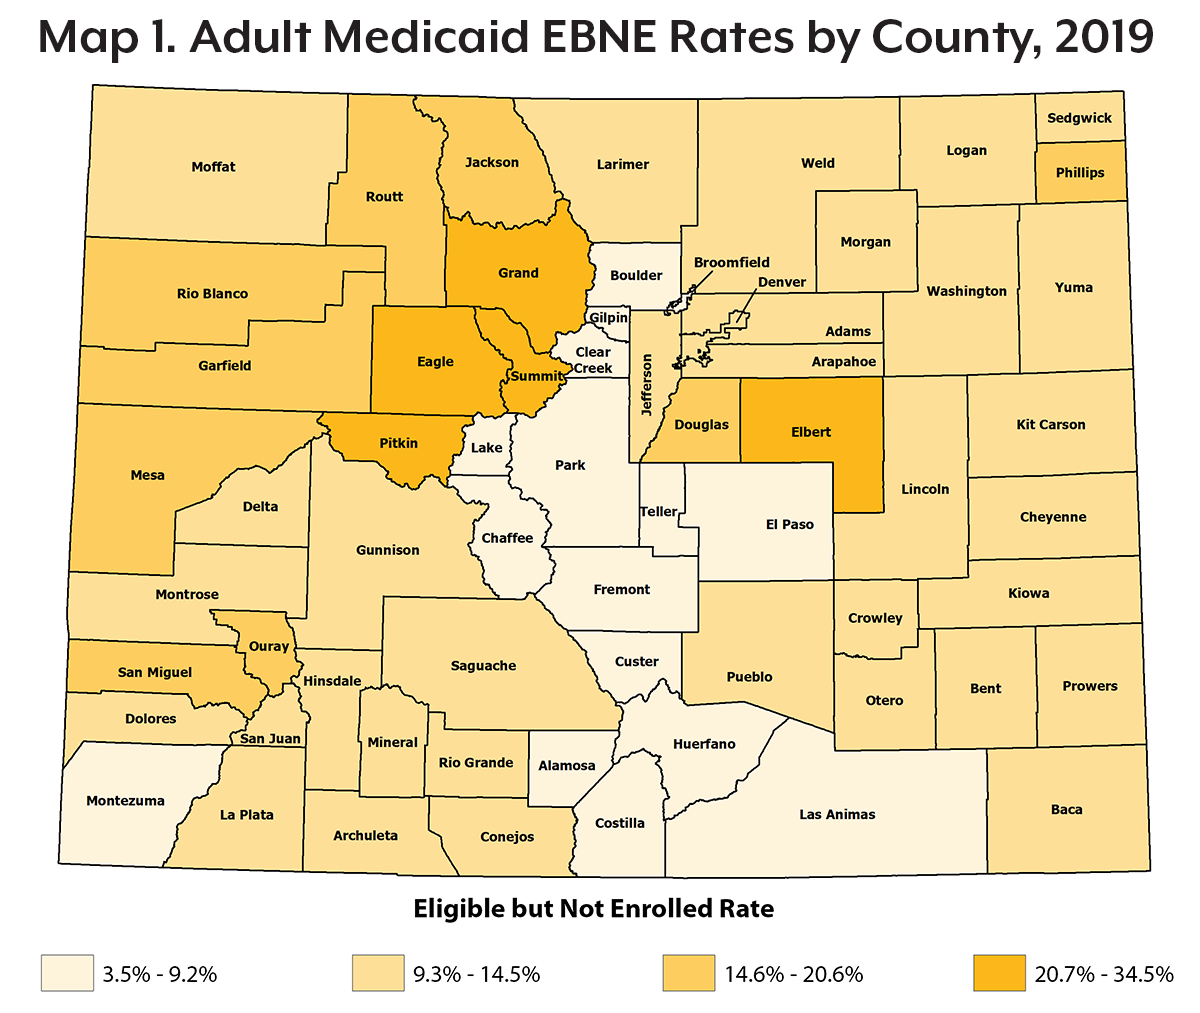 Map 1. Adult Medicaid EBNE Rates by County, 2019 